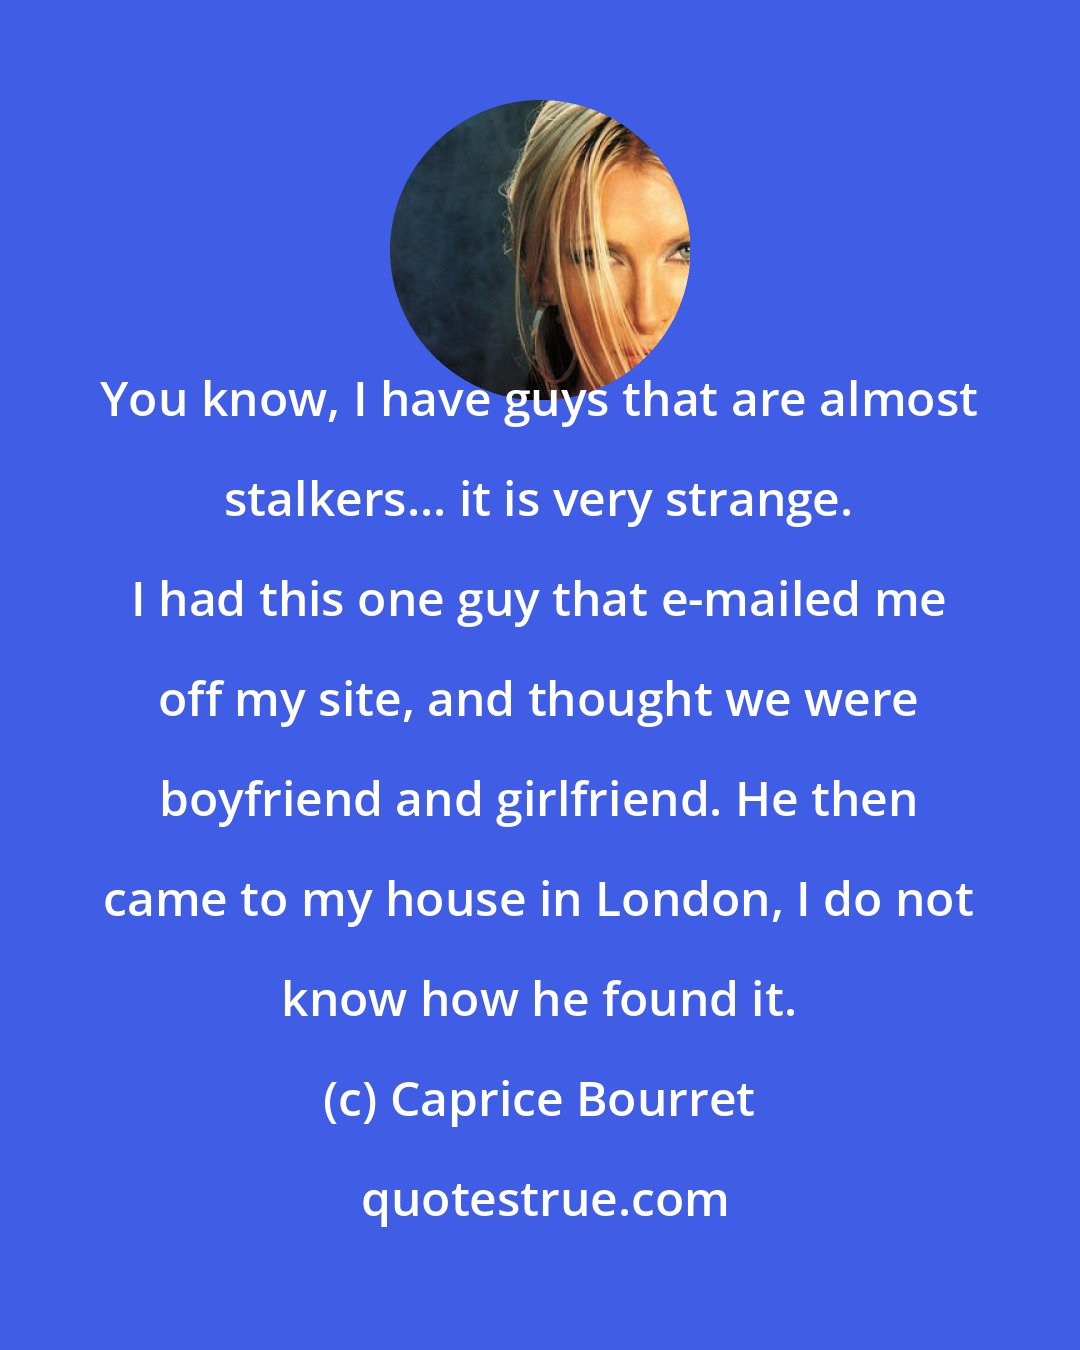 Caprice Bourret: You know, I have guys that are almost stalkers... it is very strange. I had this one guy that e-mailed me off my site, and thought we were boyfriend and girlfriend. He then came to my house in London, I do not know how he found it.